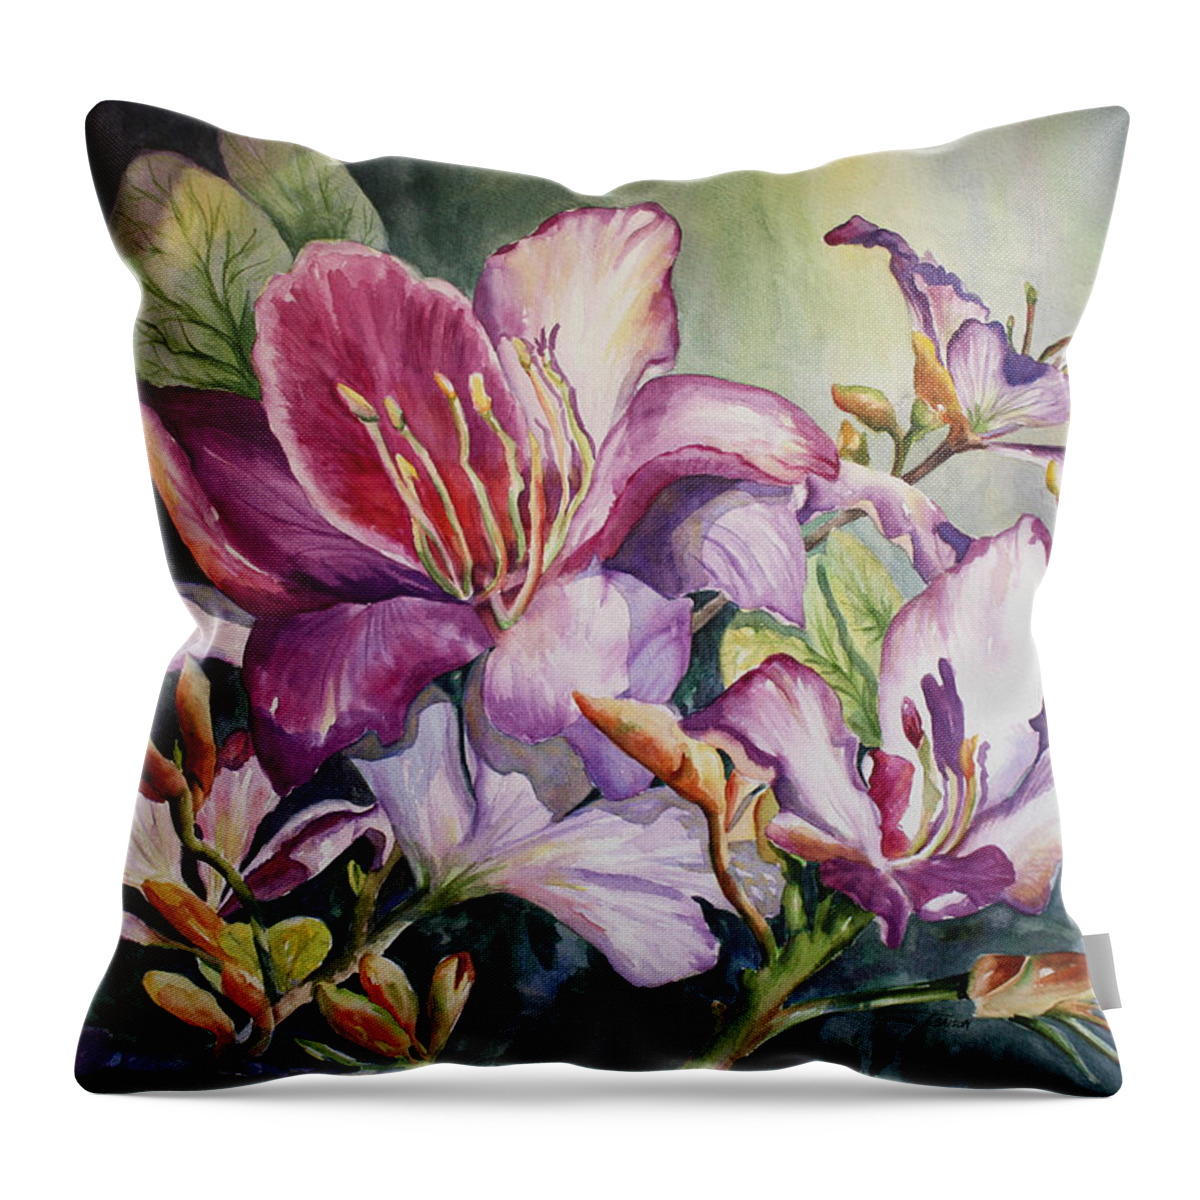 Orchids Throw Pillow featuring the painting She Love Radiant Orchids by Roxanne Tobaison